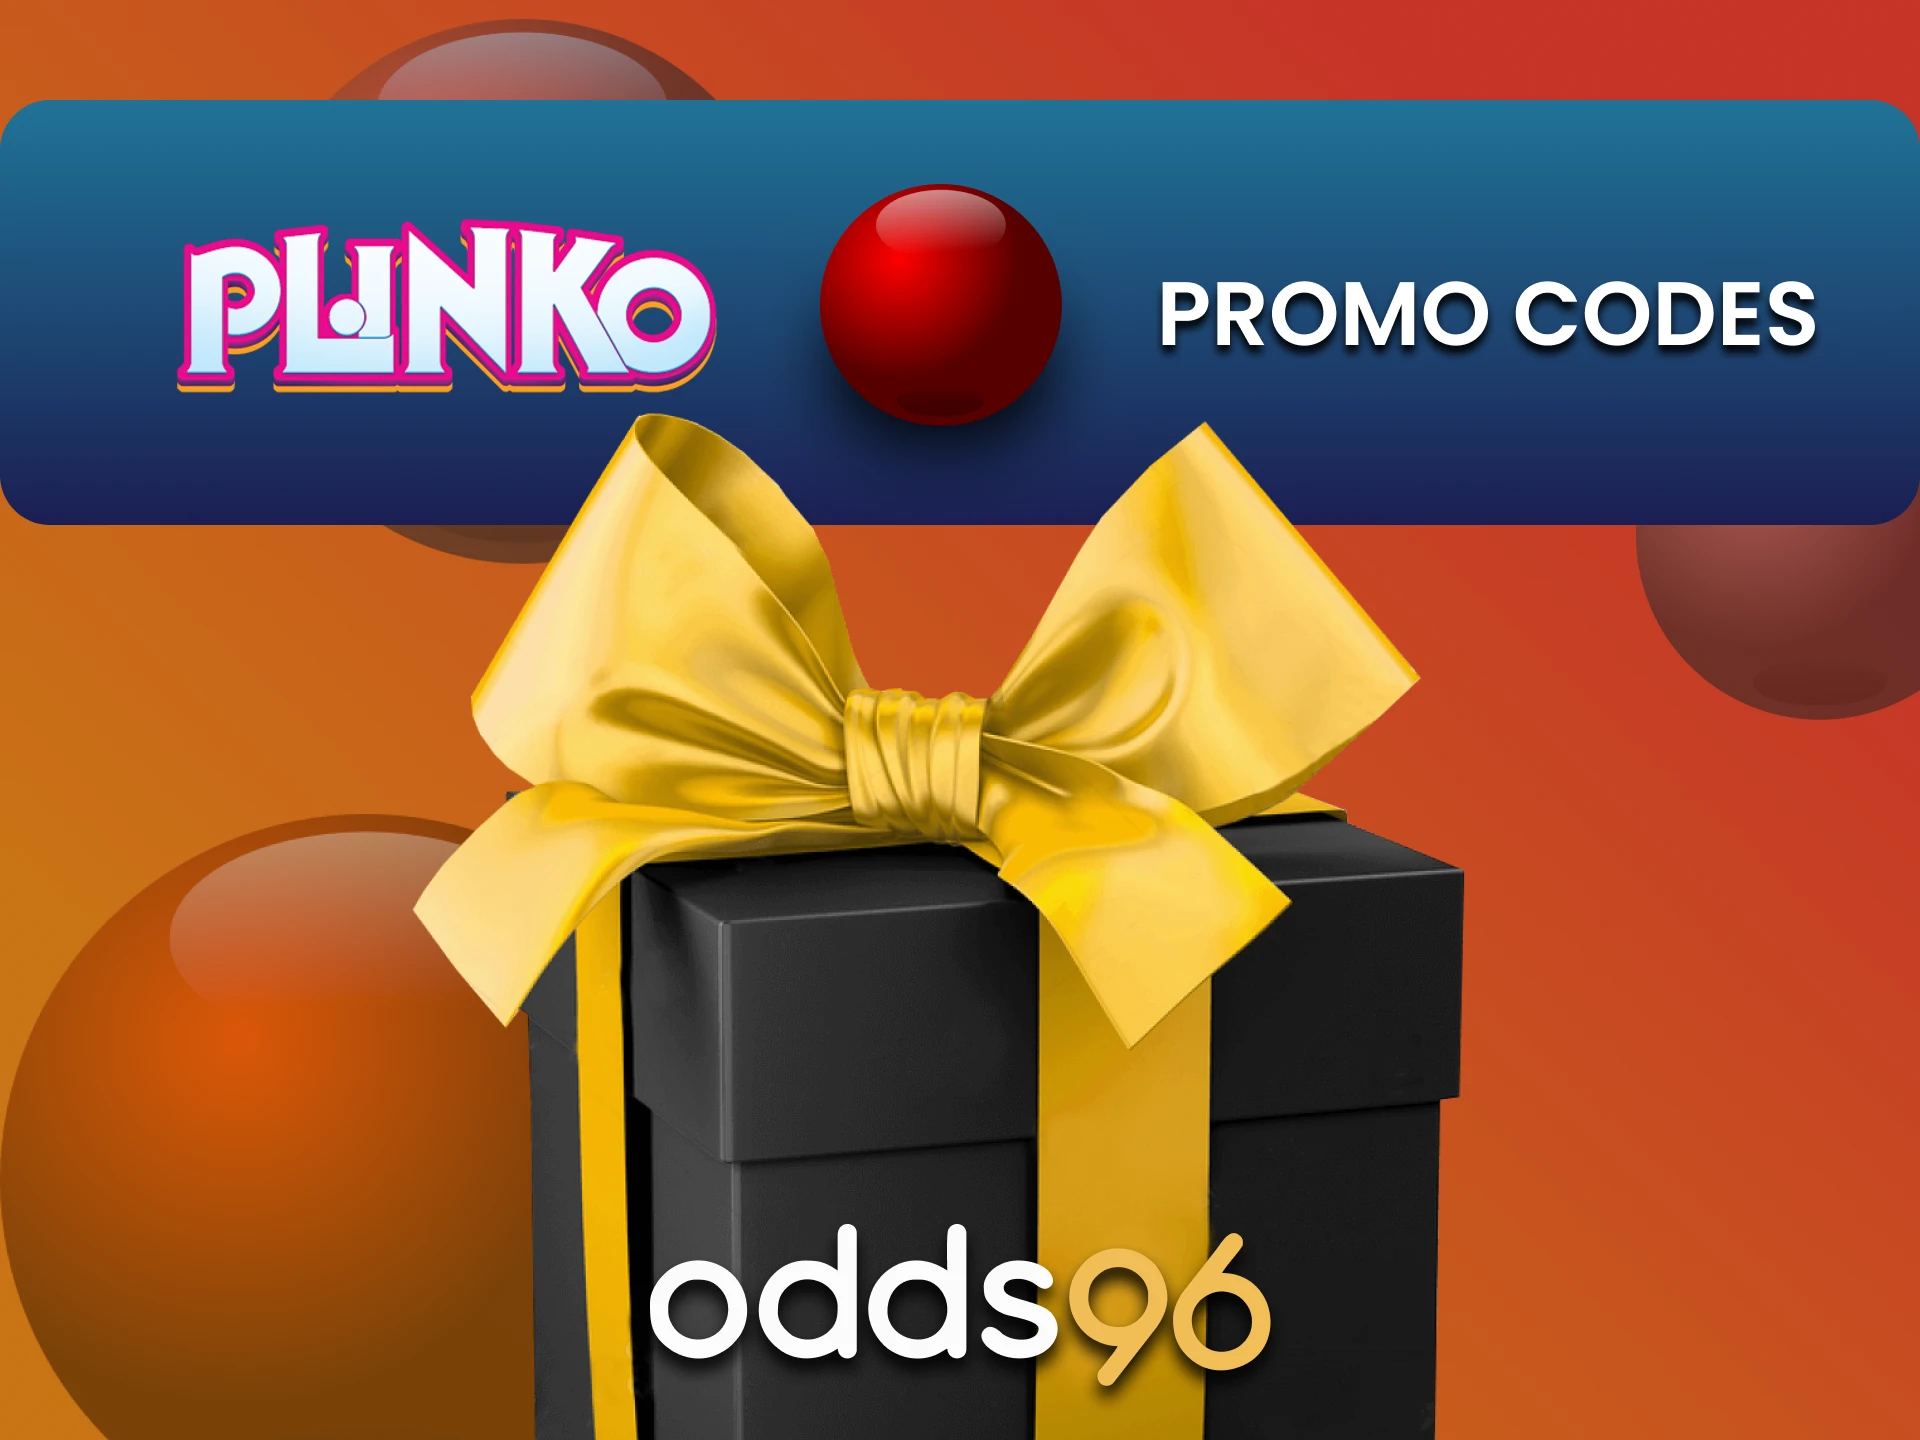 Odds96 gives a bonus promo code for playing Plinko.